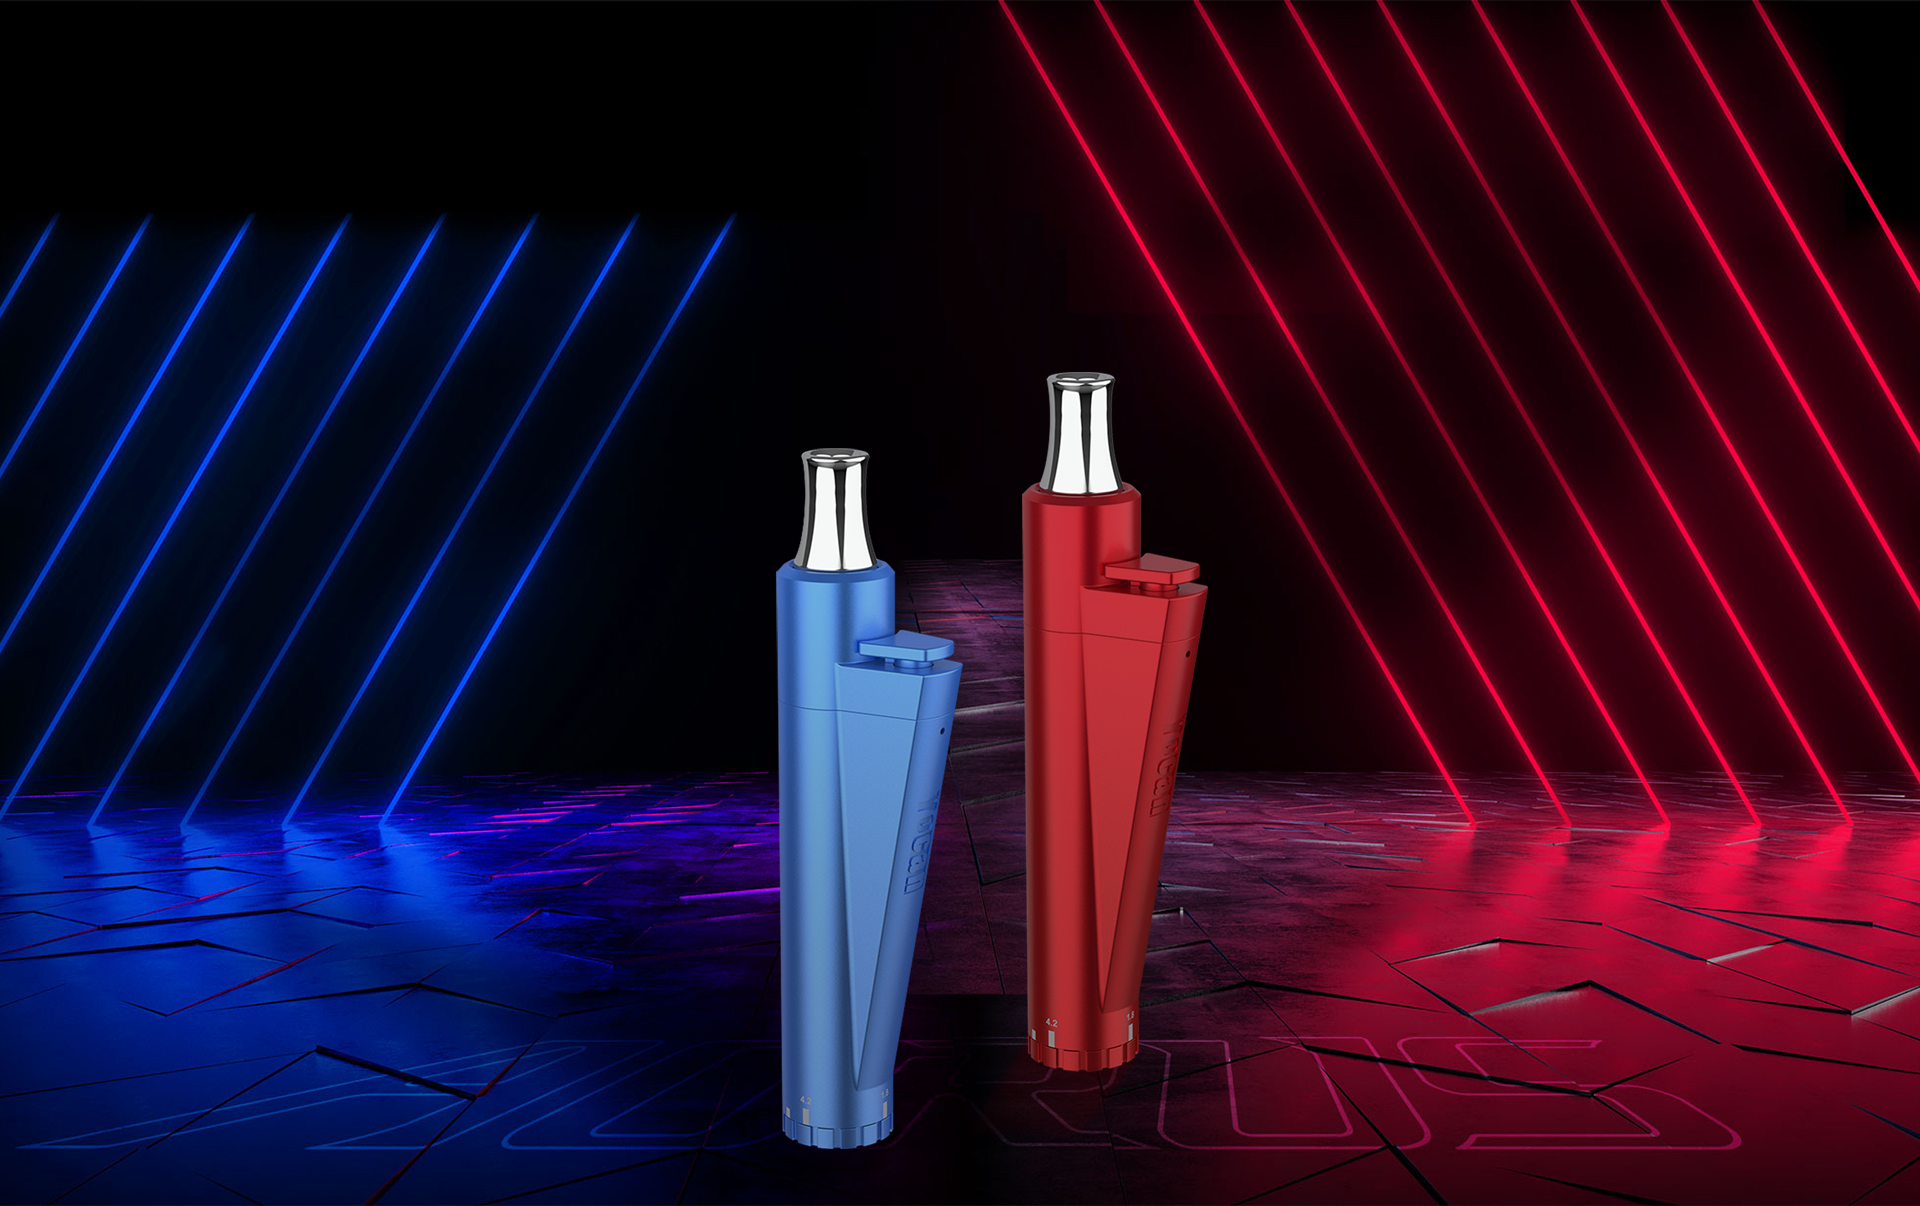 Yocan Lit Twist Concentrate Vaporizer blue and red version.